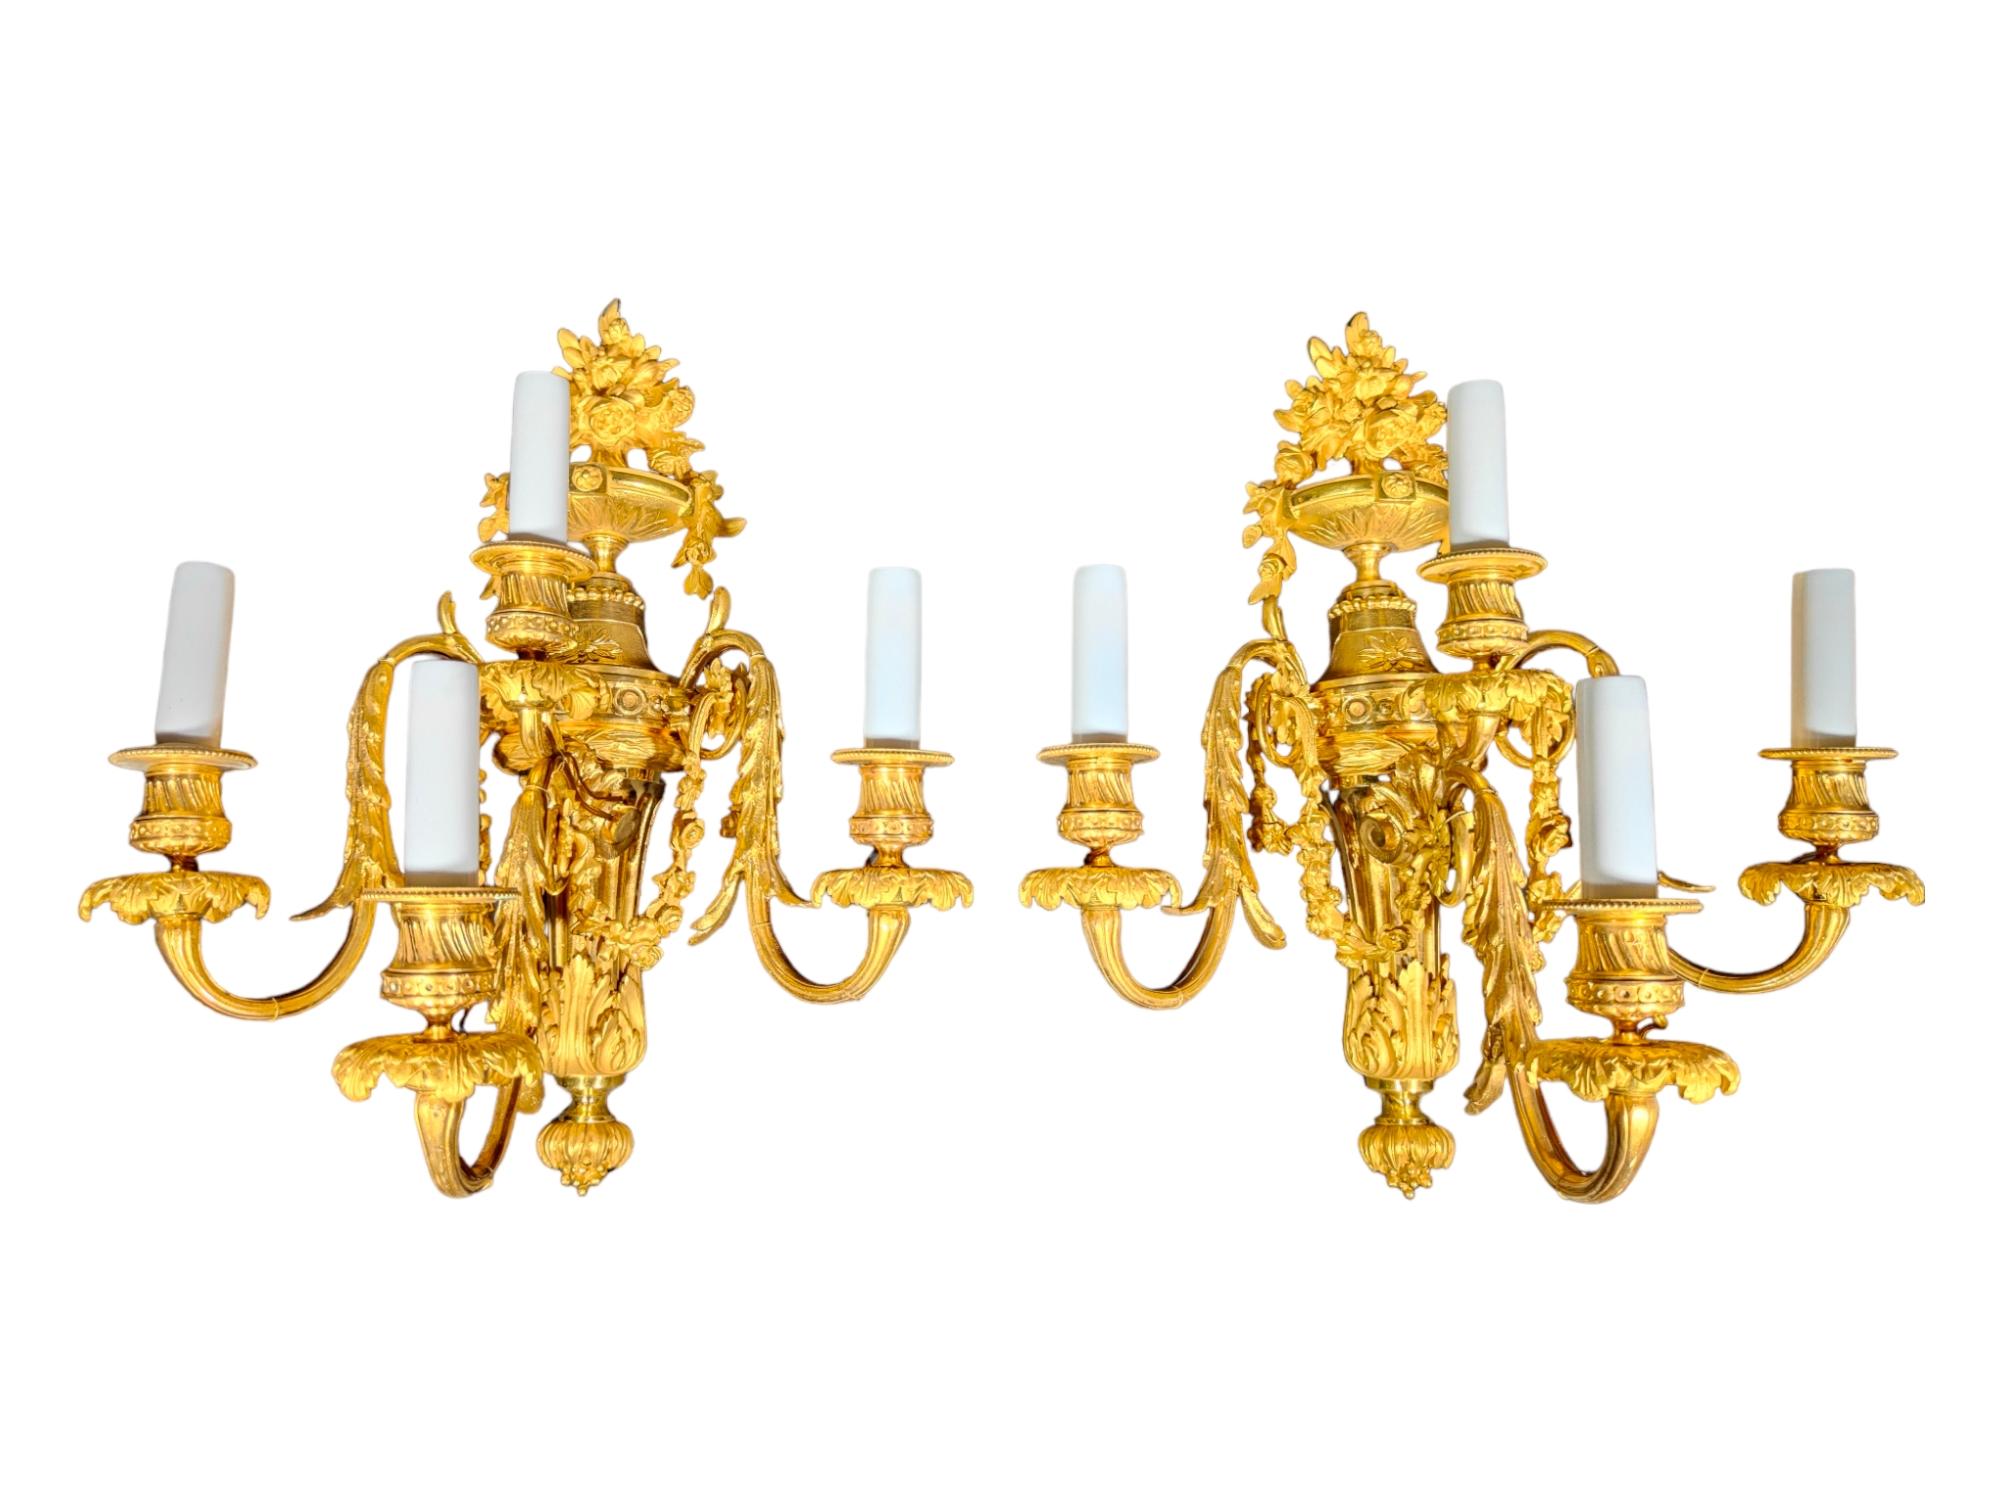 Pair Of Sconces In Dore Bronze Italian Empire Period Eighteenth Century
IMPORTANT PAIR OF END OF THE 18TH CENTURY CANDLEHOLDERS IN GILT BRONZE FROM THE TIME OF THE ITALIAN EMPIRE THE GILDING IS IN EXCELLENT CONDITION AND THE SCISSOR WORK IS VERY